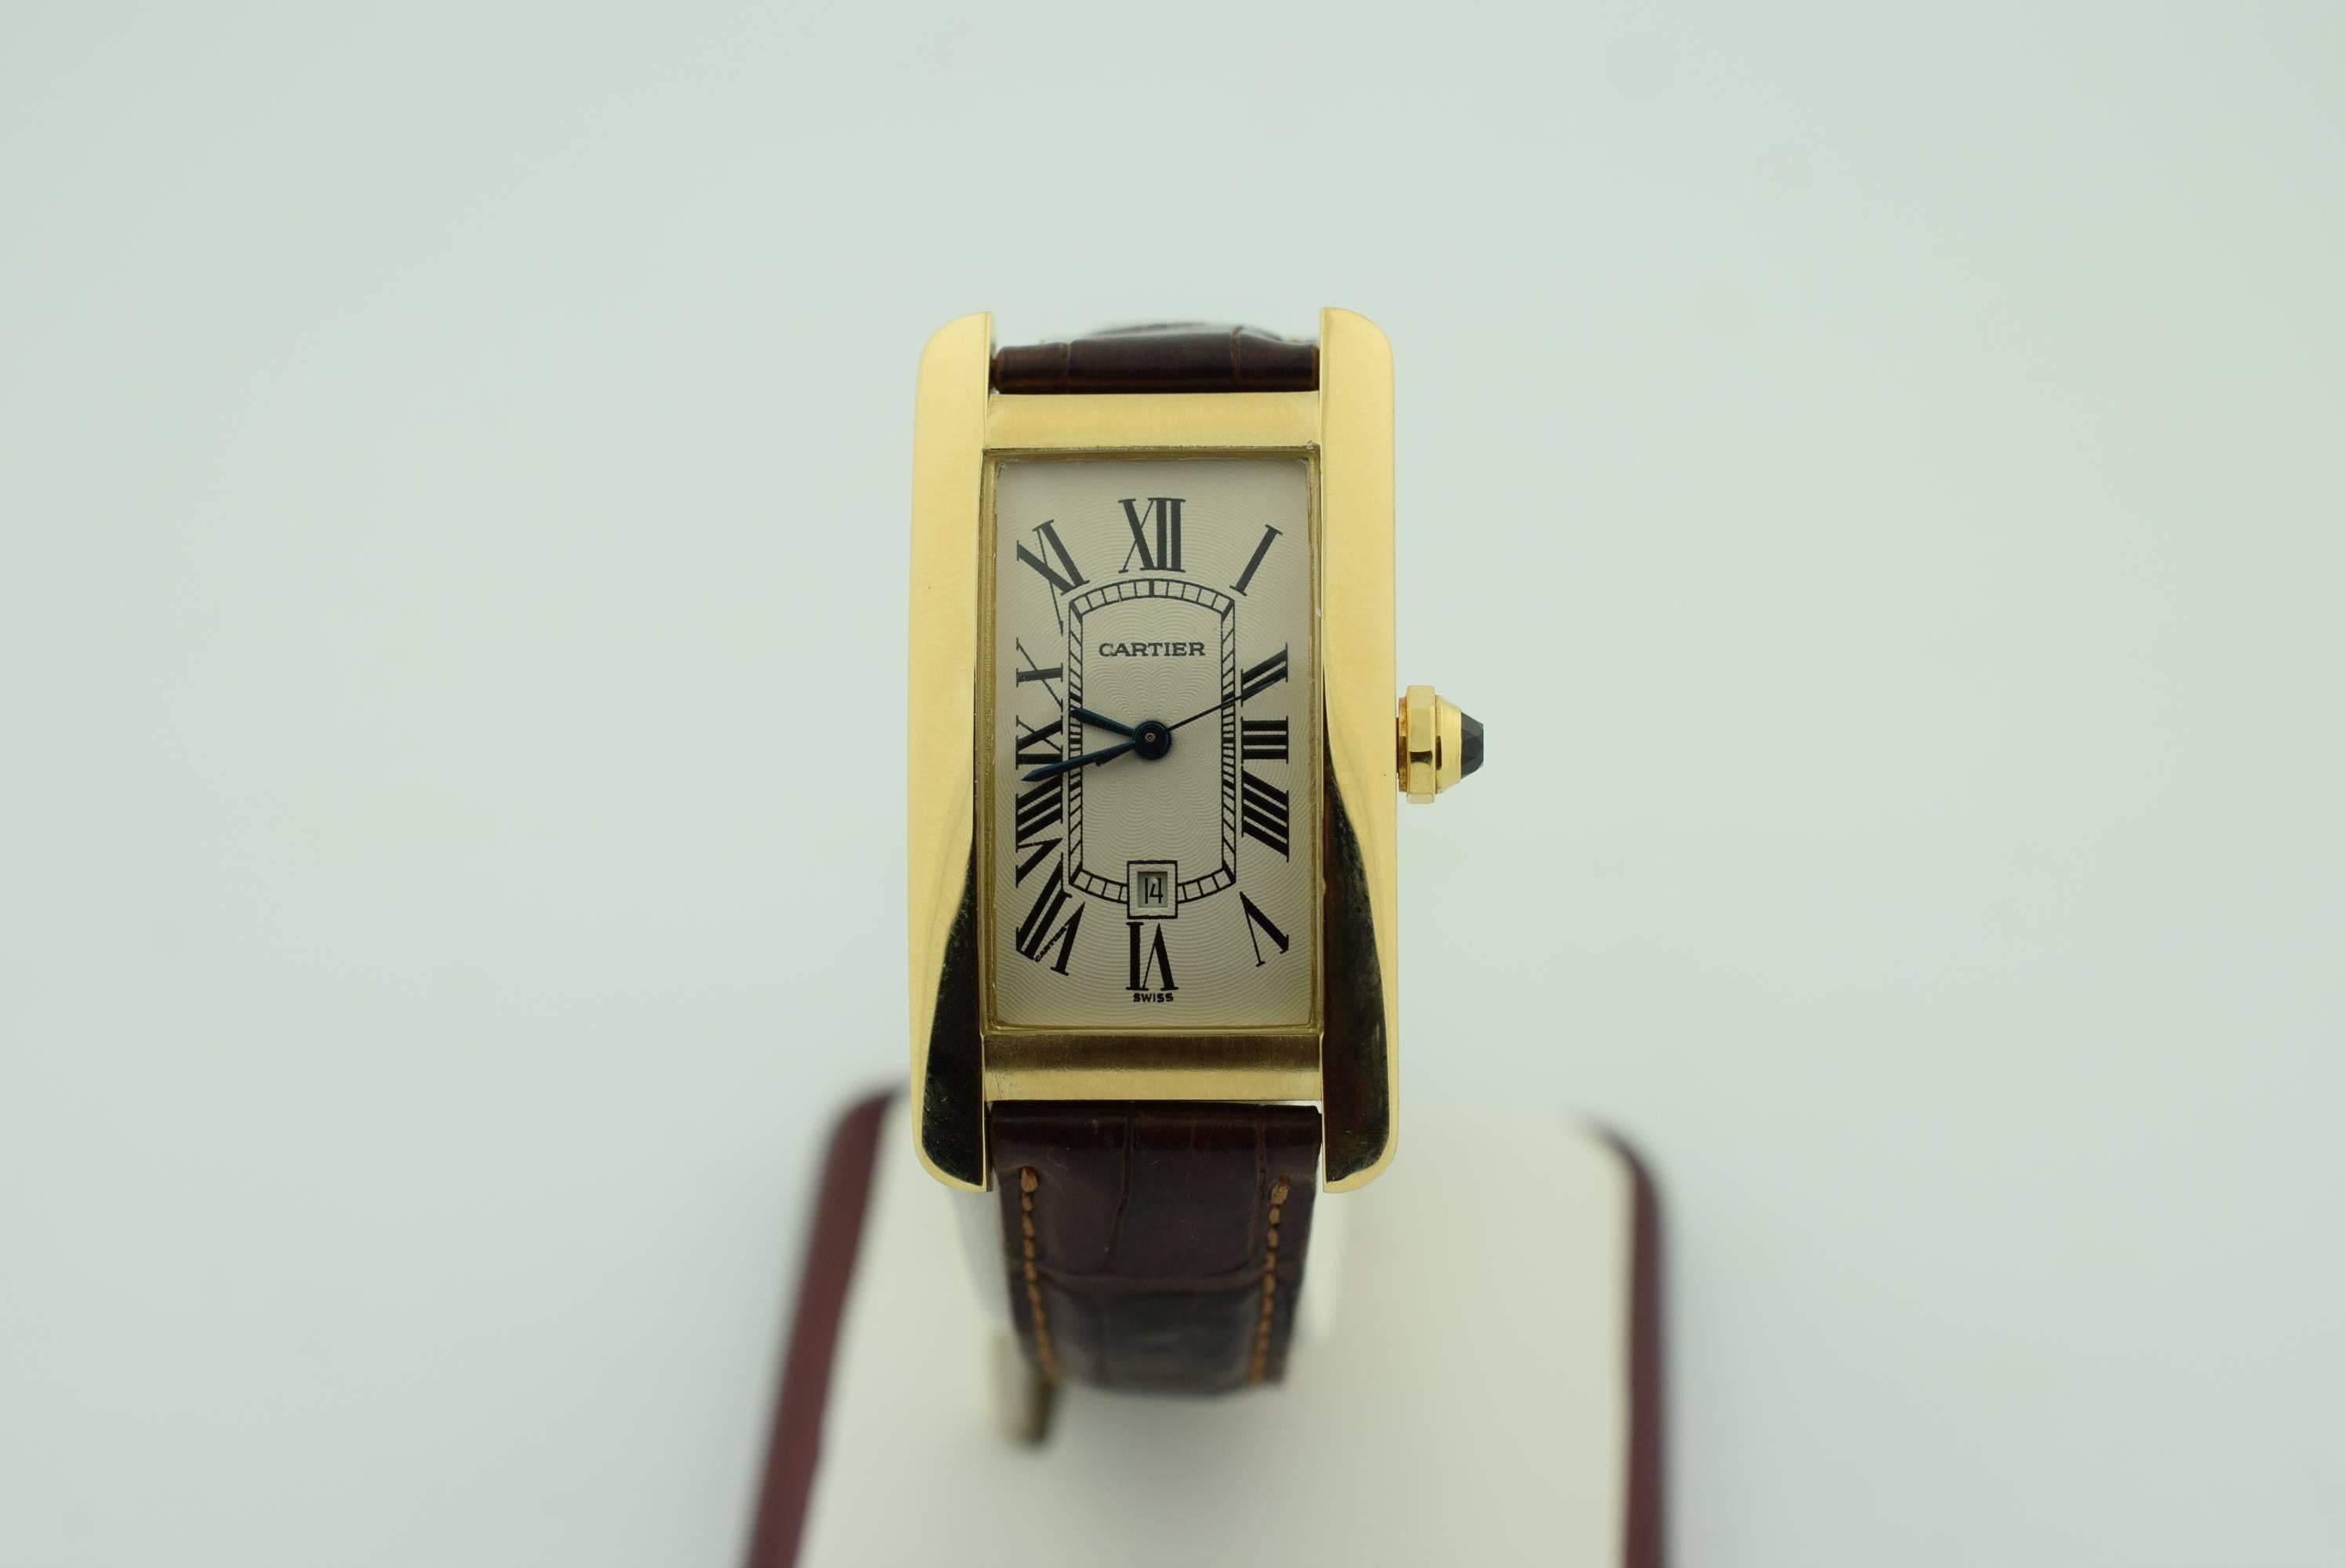 
18k yellow gold case with a brown leather strap. Blue steel hands and black Arabic numeral hour markers. Minute markers around an inner ring. Quartz movement. Scratch resistant sapphire crystal. 18k Yellow gold octagonal crown. Solid case back.